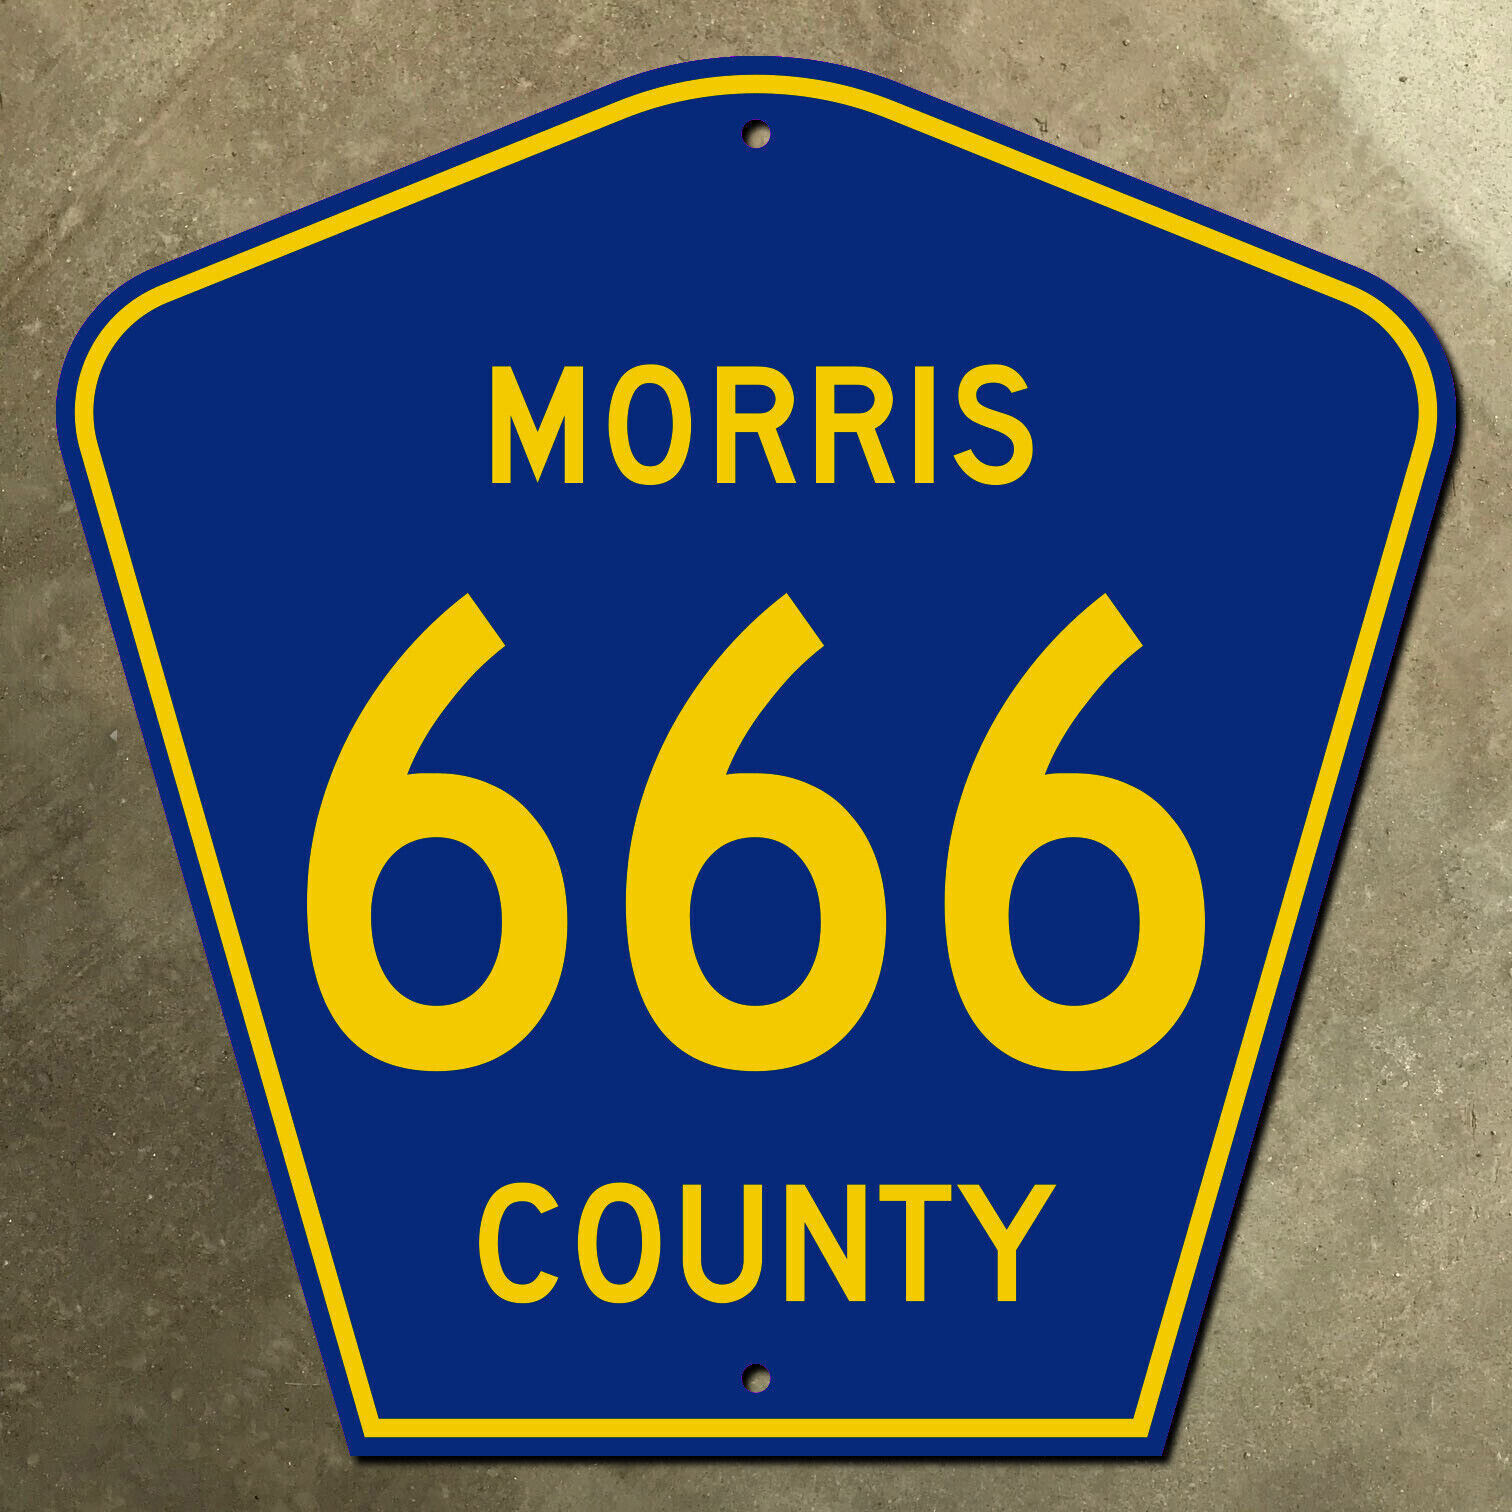 New Jersey Morris County NYC metro route 666 highway marker 1959 road sign 24x24